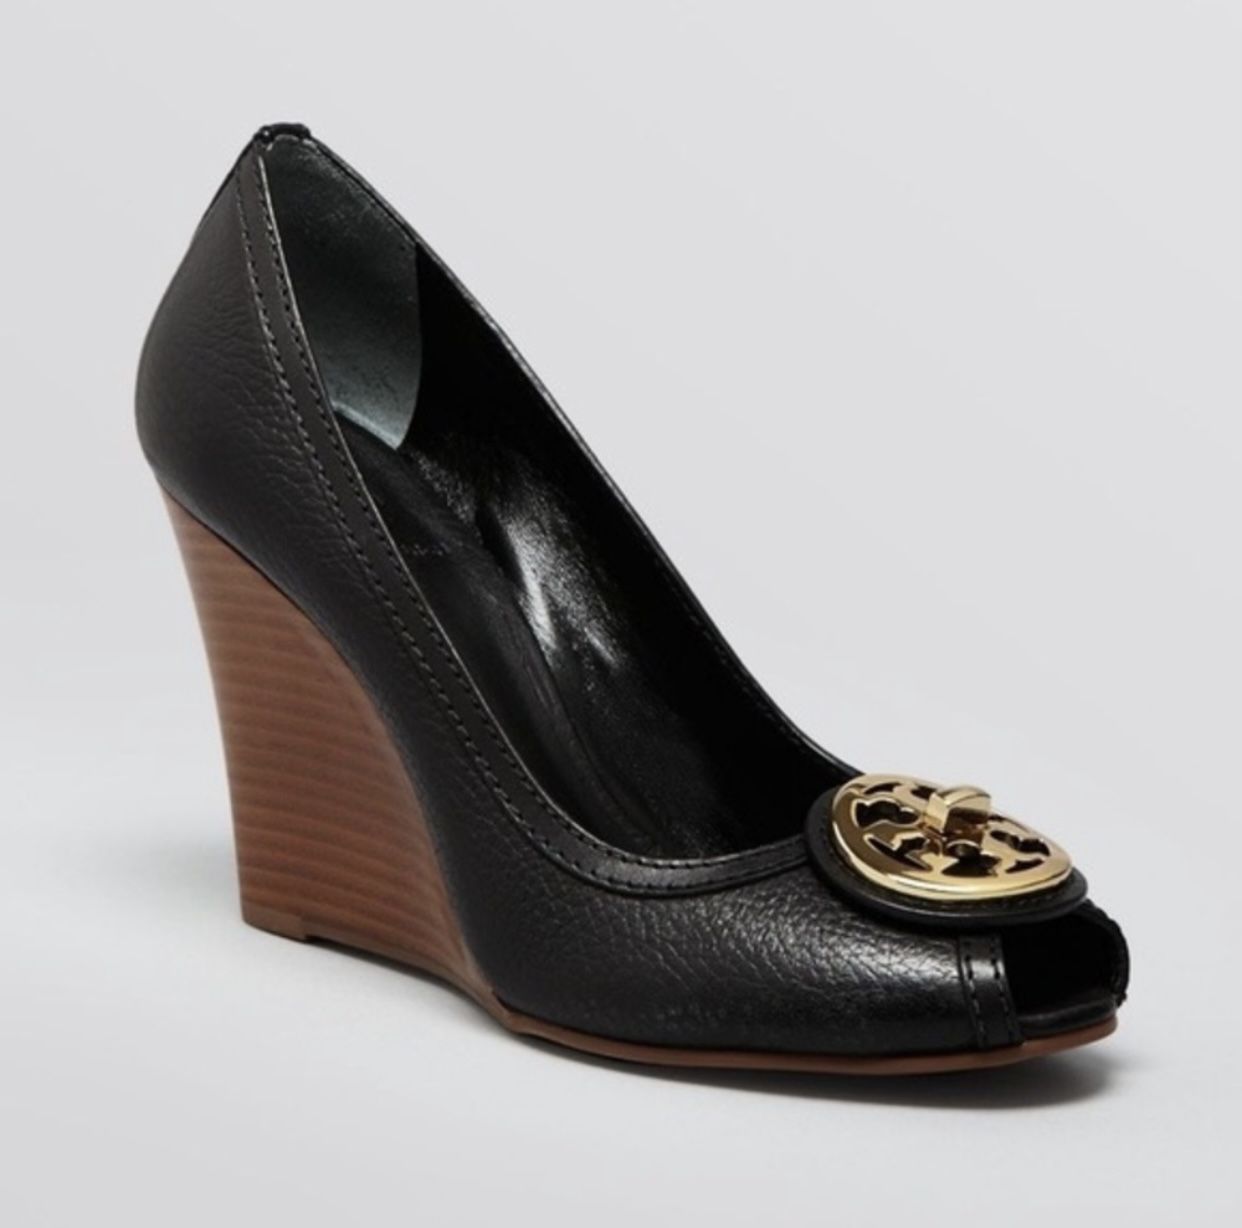 TORY BURCH SELMA OPEN TOE WEDGE SHOES Black TUMBLED LEATHER SIZE  M.  Make an offer! for Sale in New York, NY - OfferUp